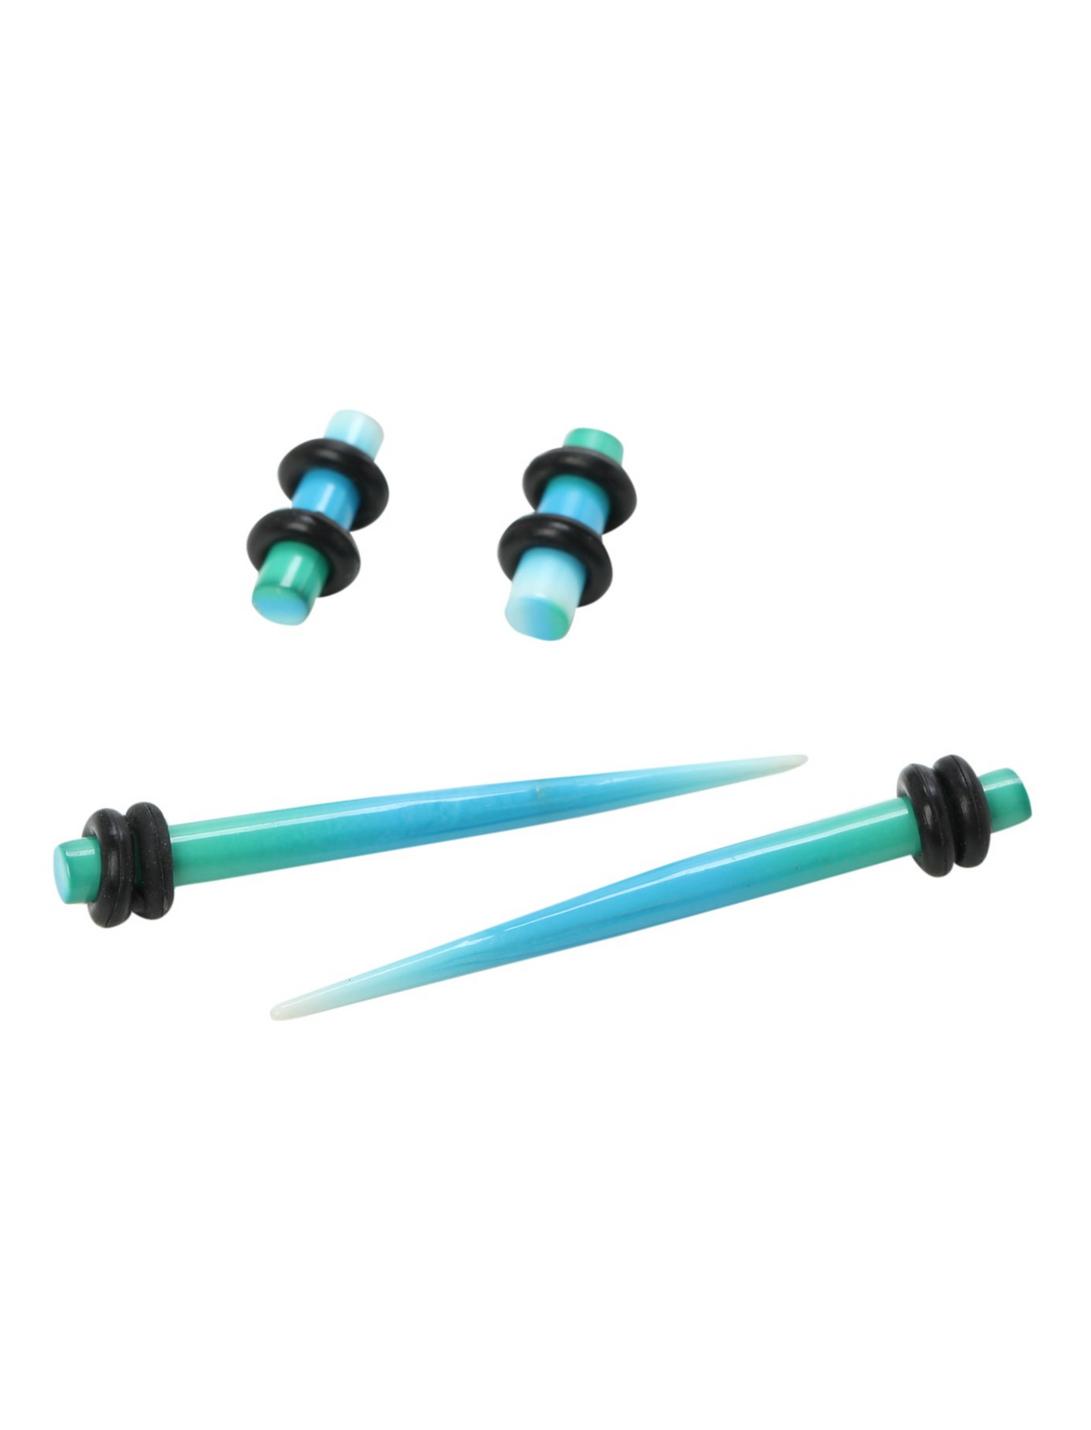 Acrylic Green Blue White Ombre Micro Taper And Plug 4 Pack, MULTI, hi-res